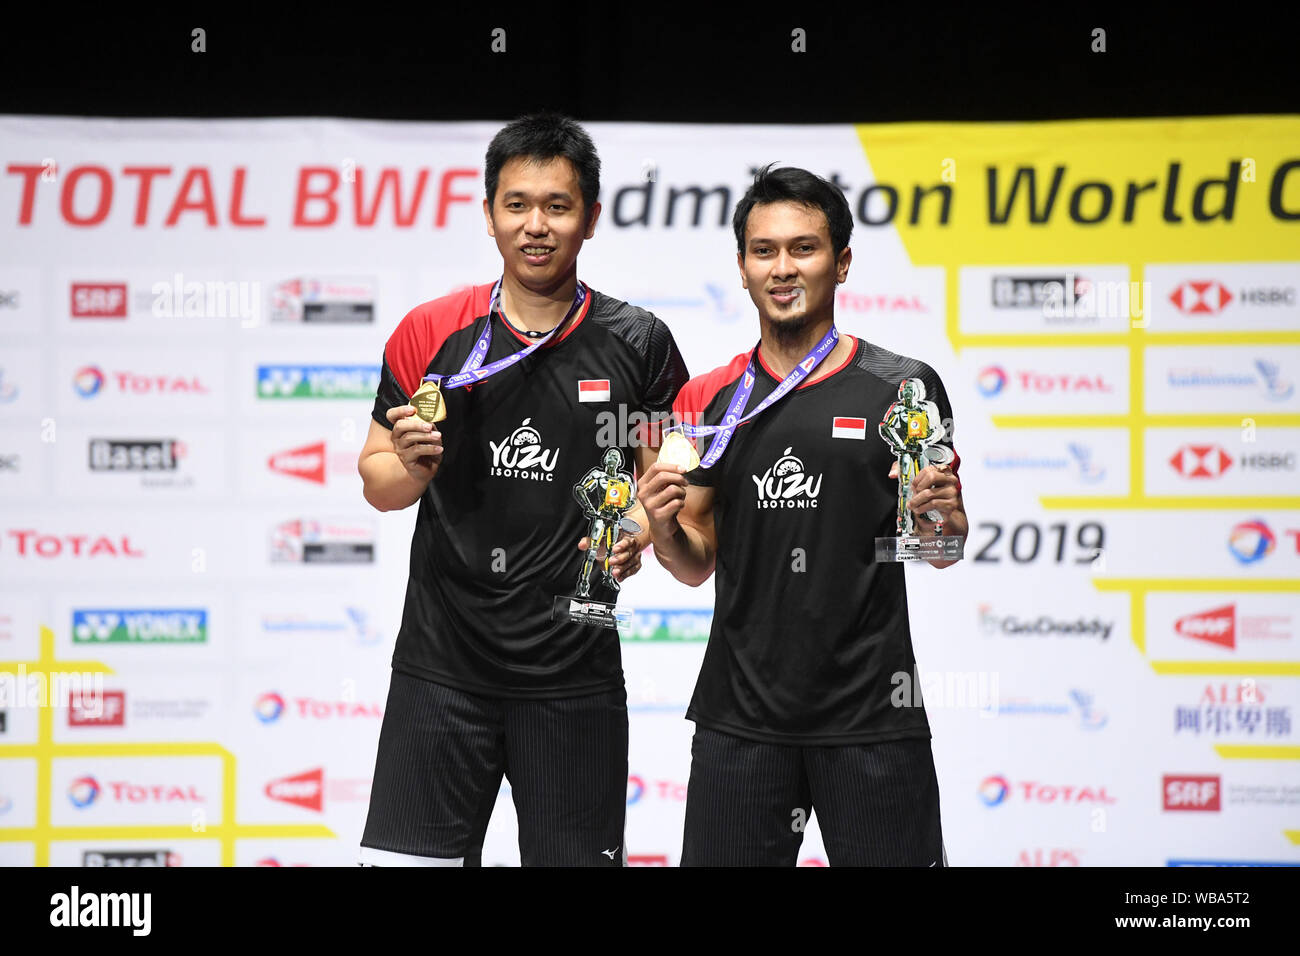 Basel, Switzerland. 25th Aug, 2019. Gold medalists Mohammad Ahsan(R)/Hendra  Setiawan of Indonesia pose for photos during the awarding ceremony of the  men's doubles final at the BWF Badminton World Championships 2019 in